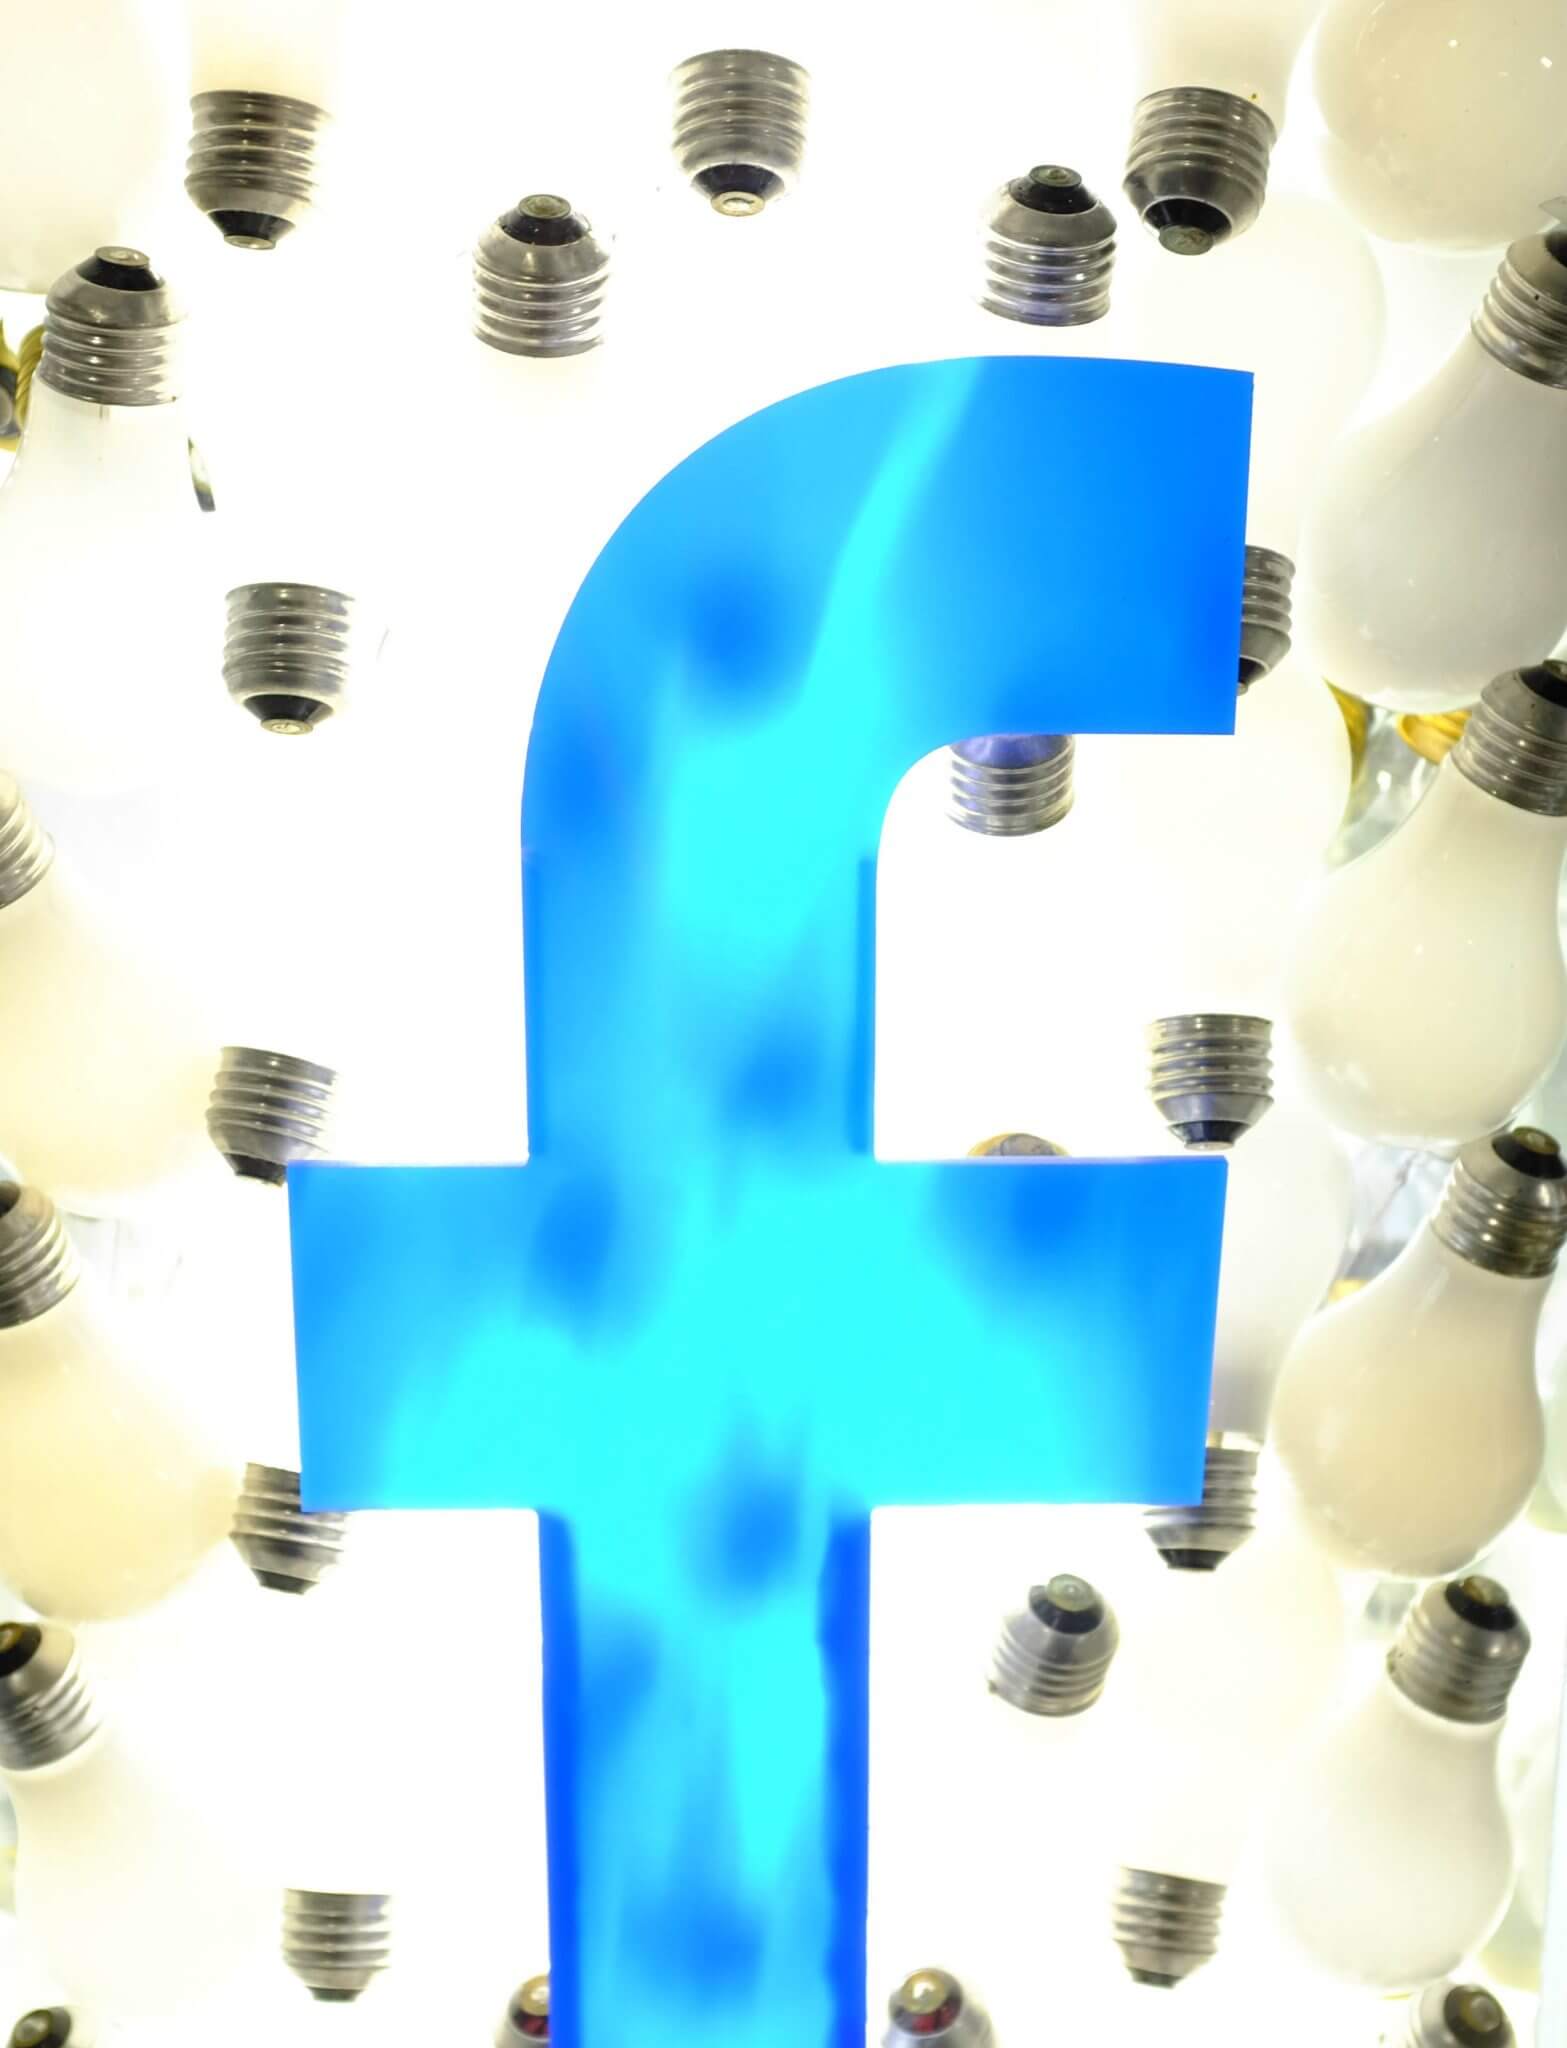 An Insiders Look at Facebook: Join Me for a Day Behind-the-Scenes